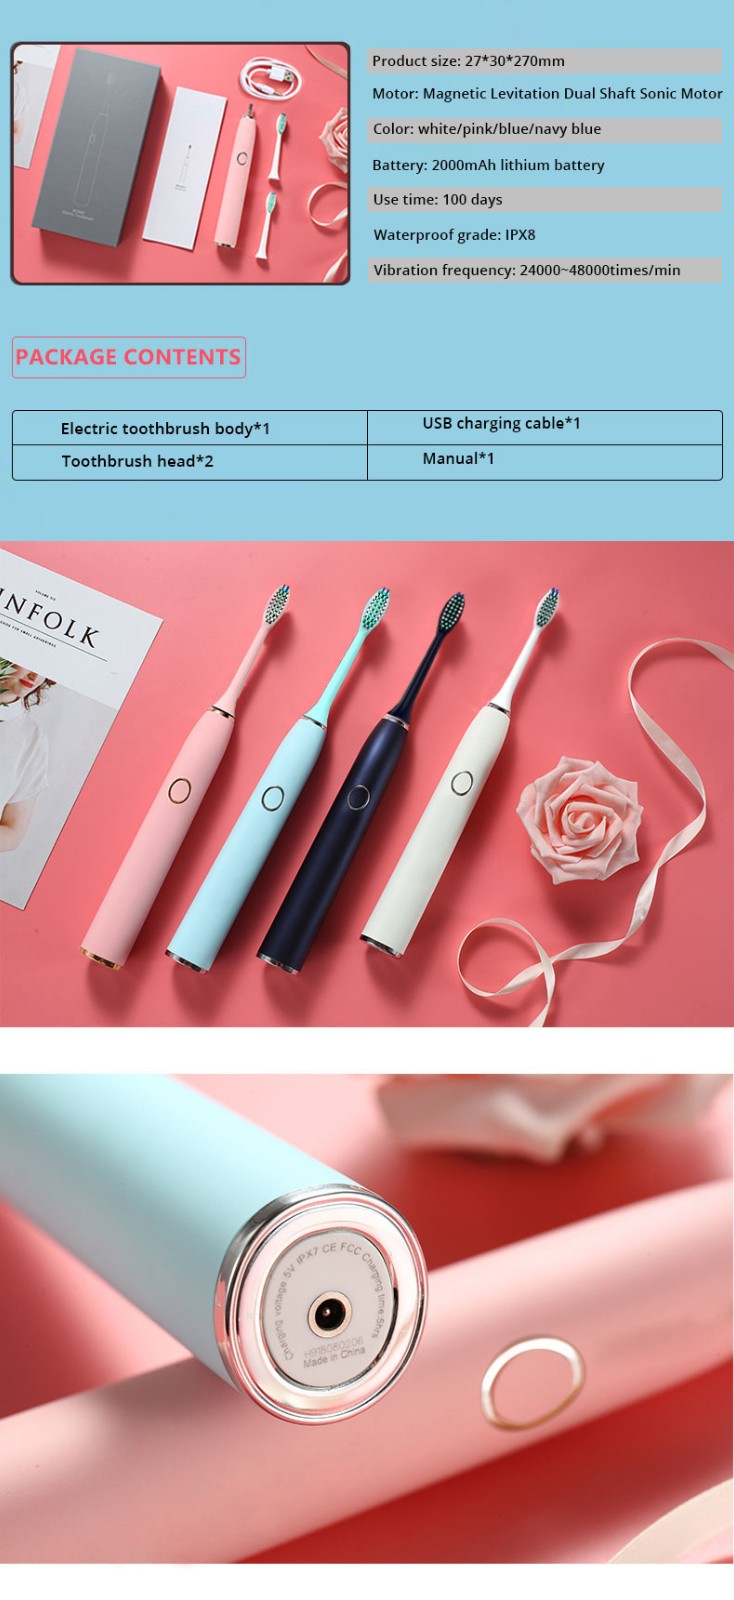 Wholesale custom battery powered toothbrush Suppliers for whitening teeth-10